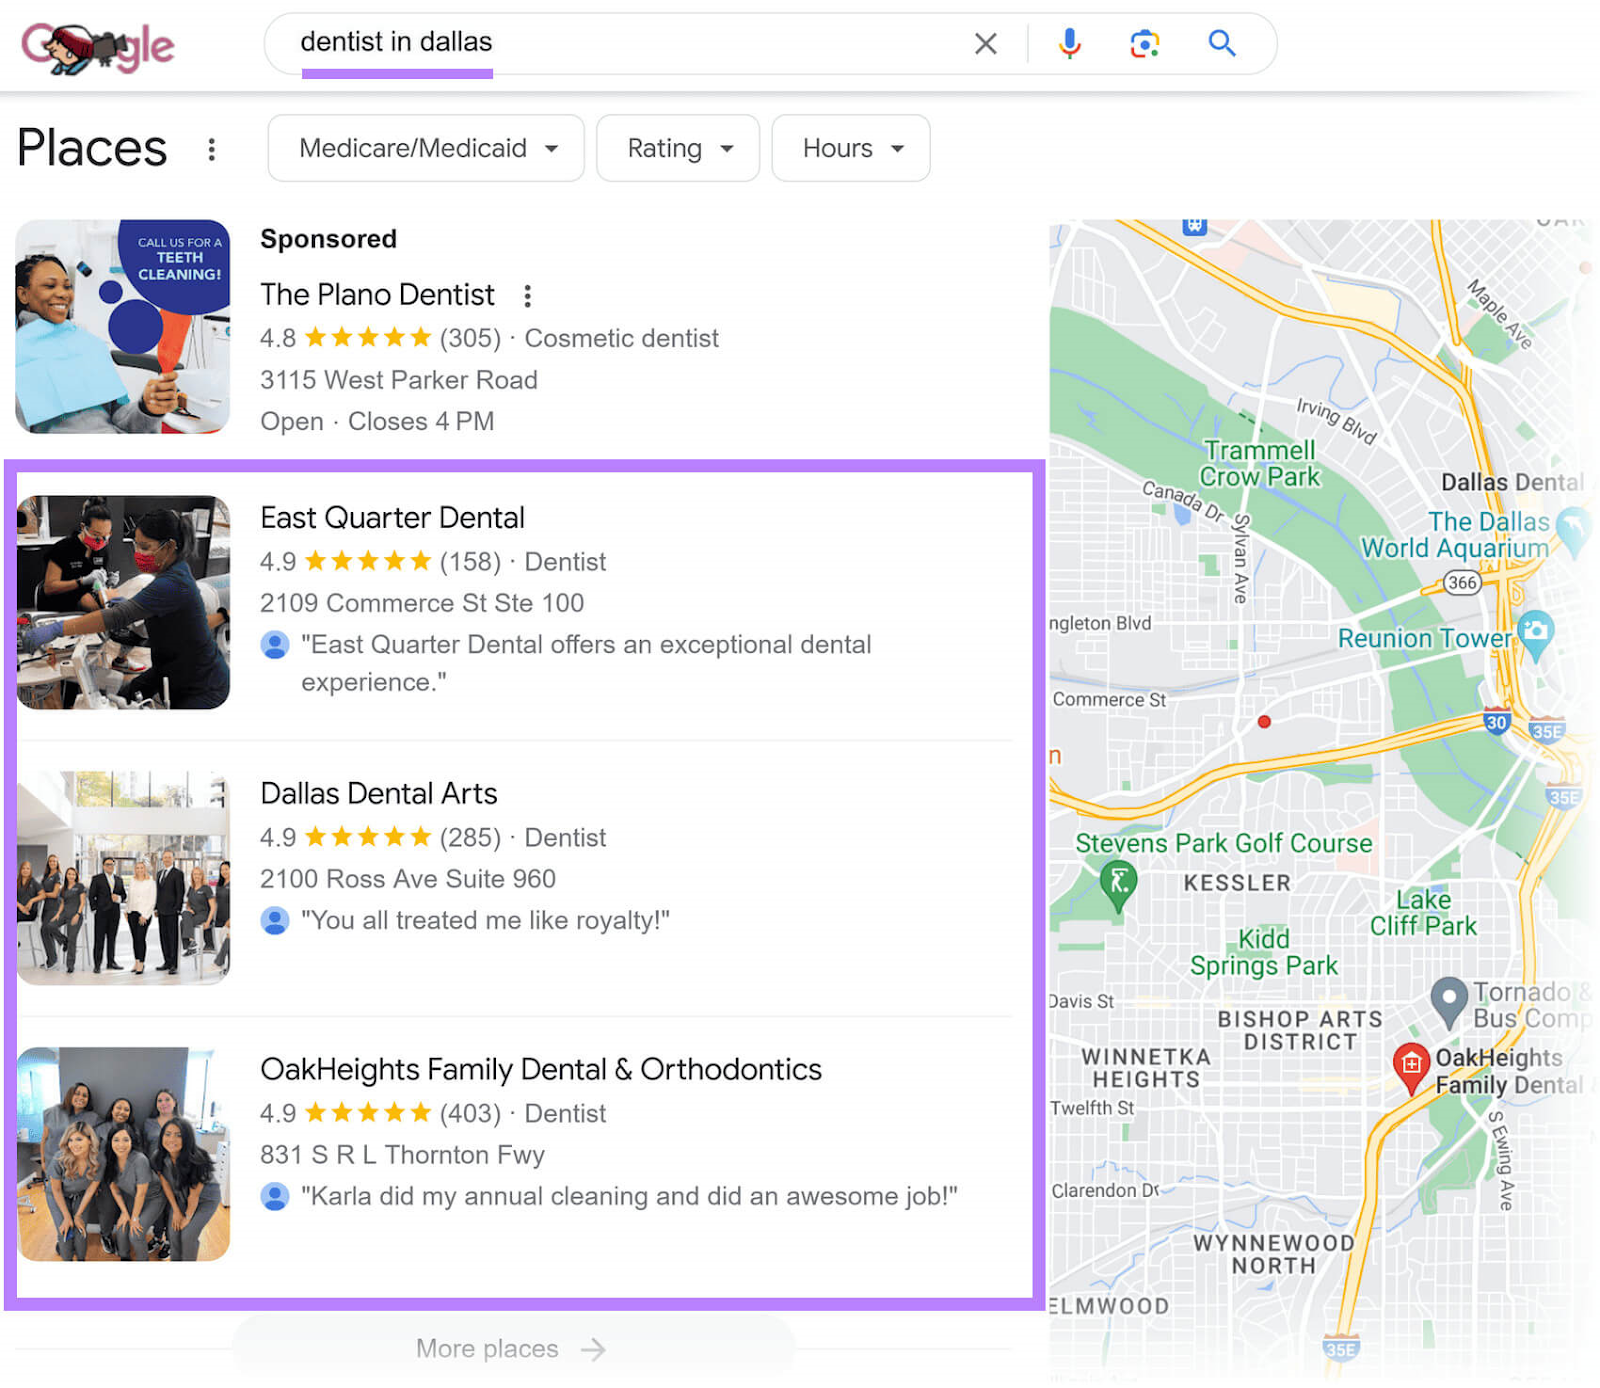 Google local pack results for "dentist in dallas" query